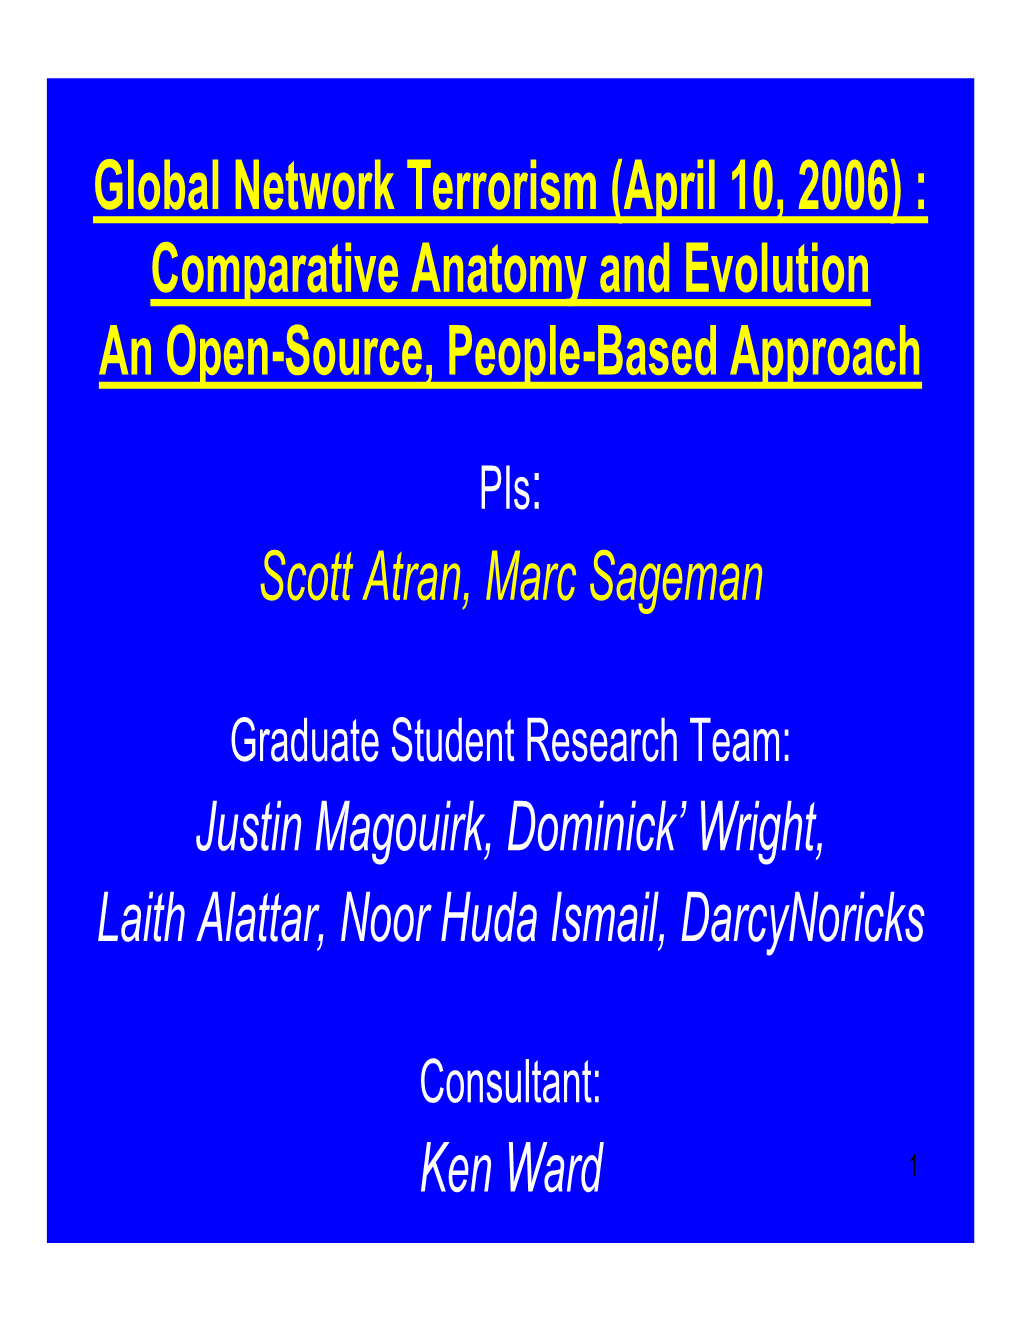 Global Network Terrorism (April 10, 2006) : Comparative Anatomy and Evolution an Open-Source, People-Based Approach